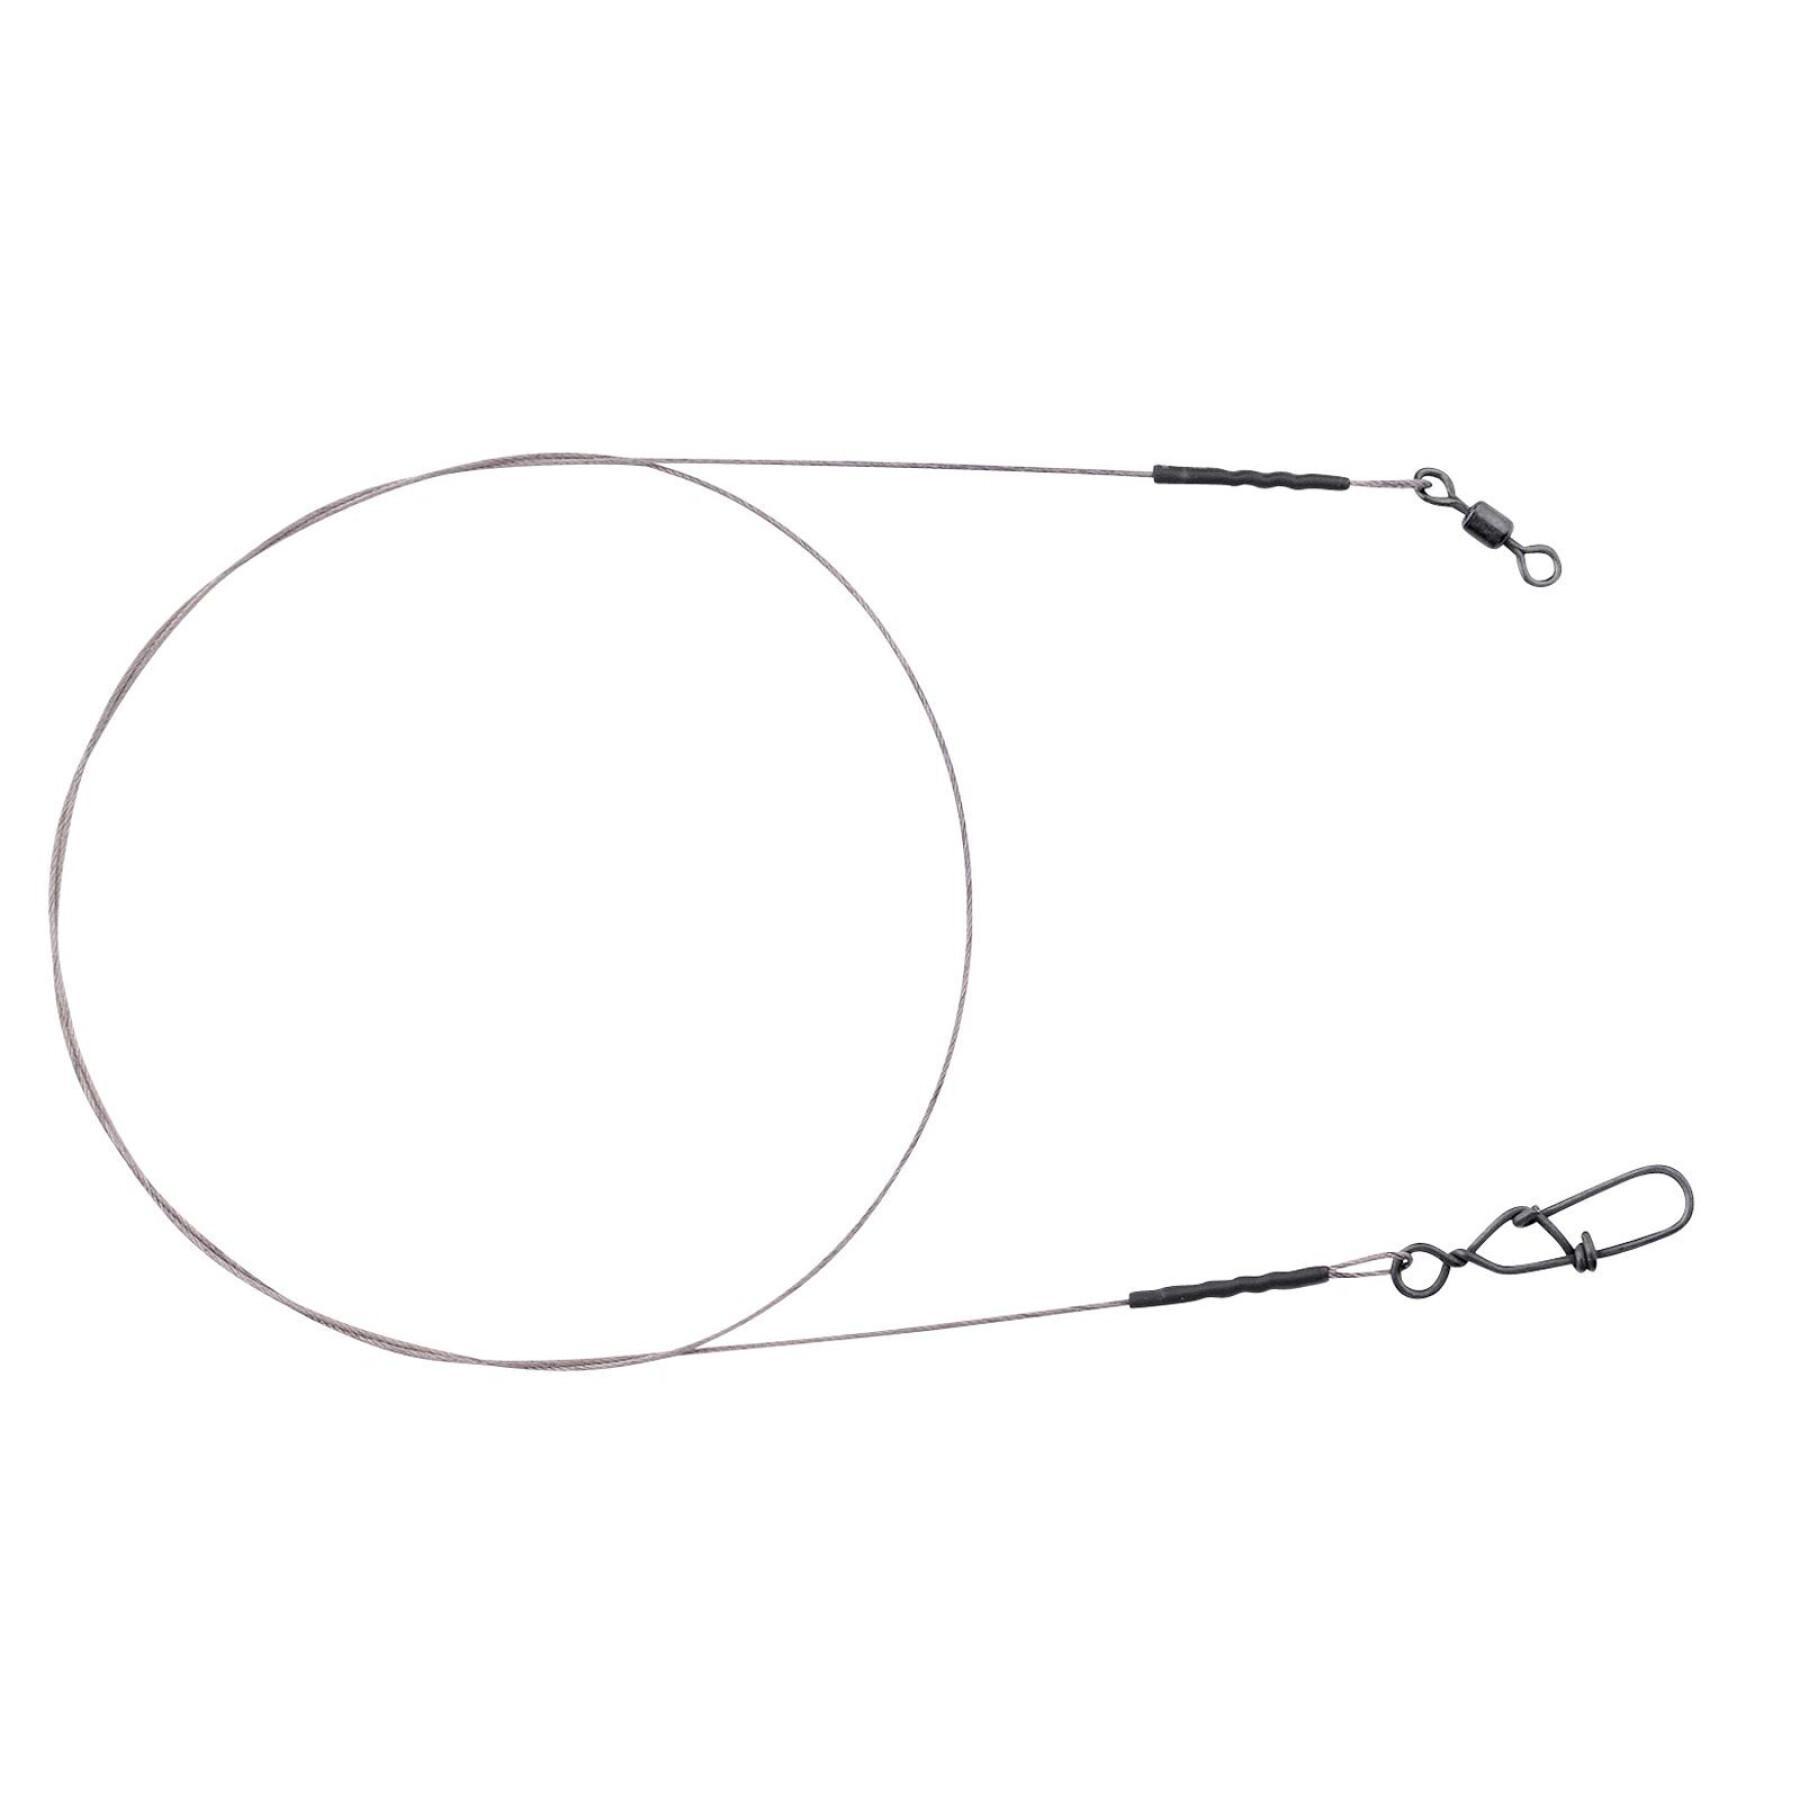 Set of 2 wire leaders Spro Leader 7x7 0,27 mm